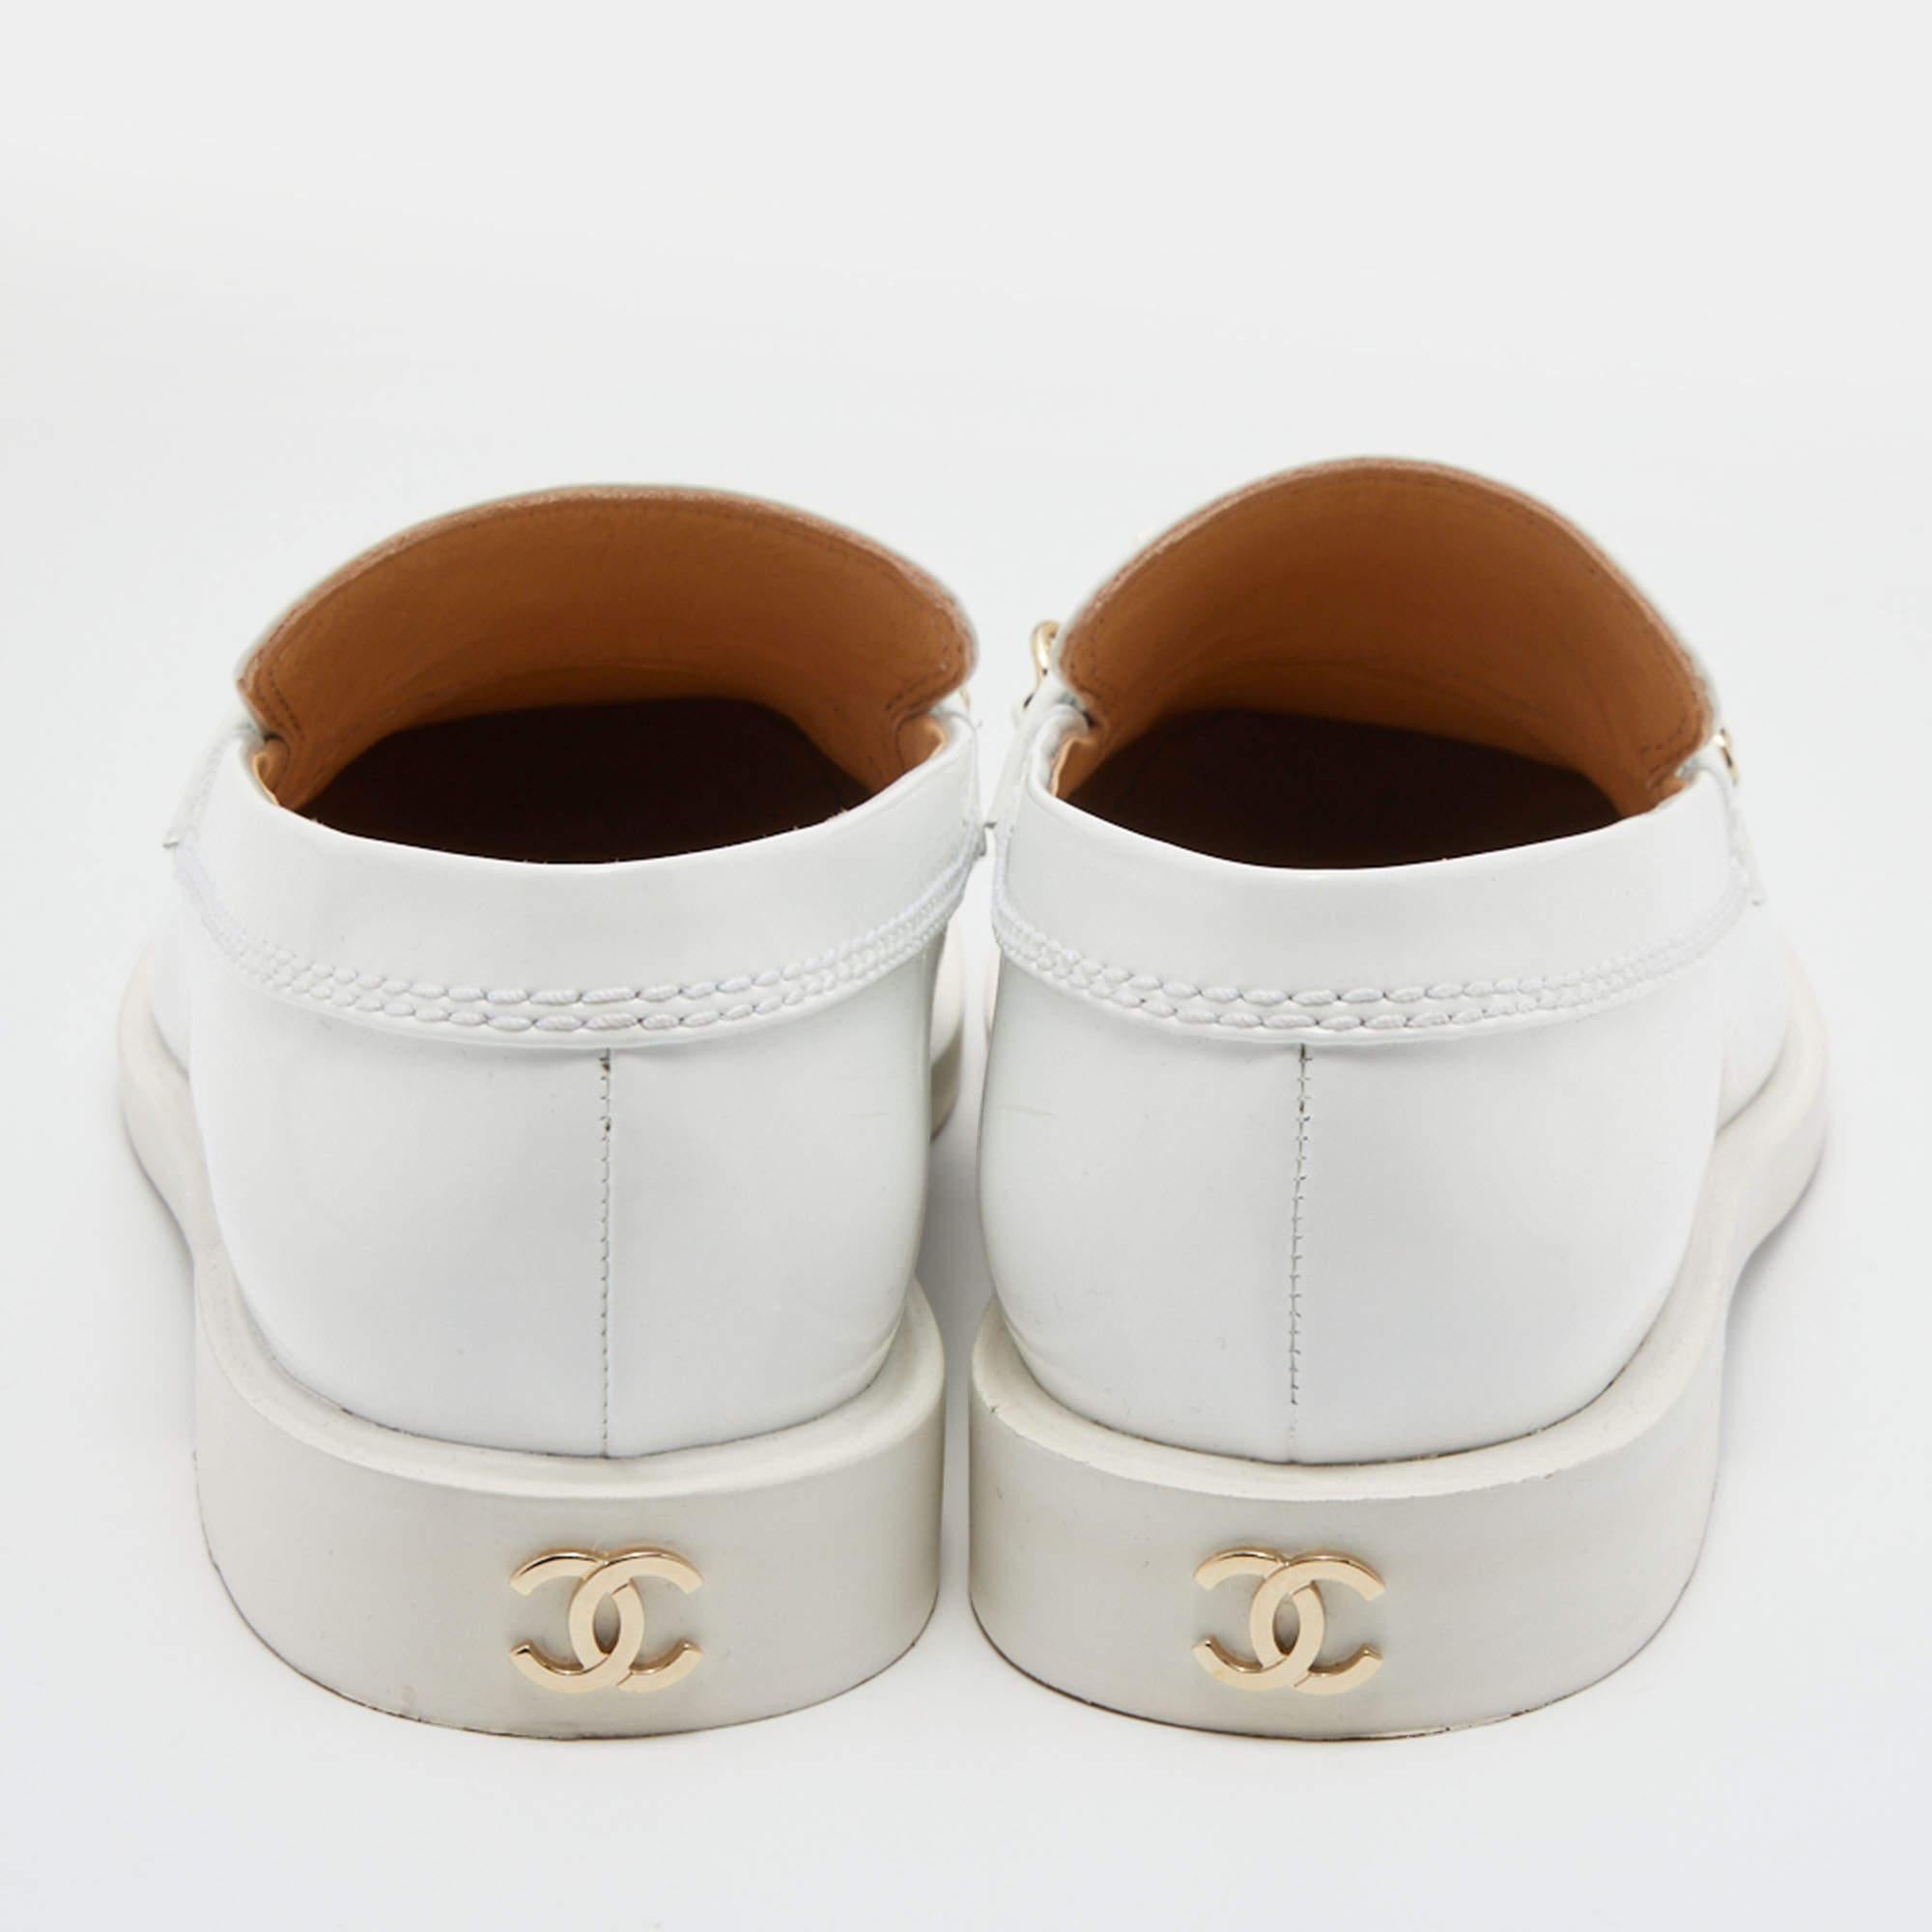 chanel white loafers